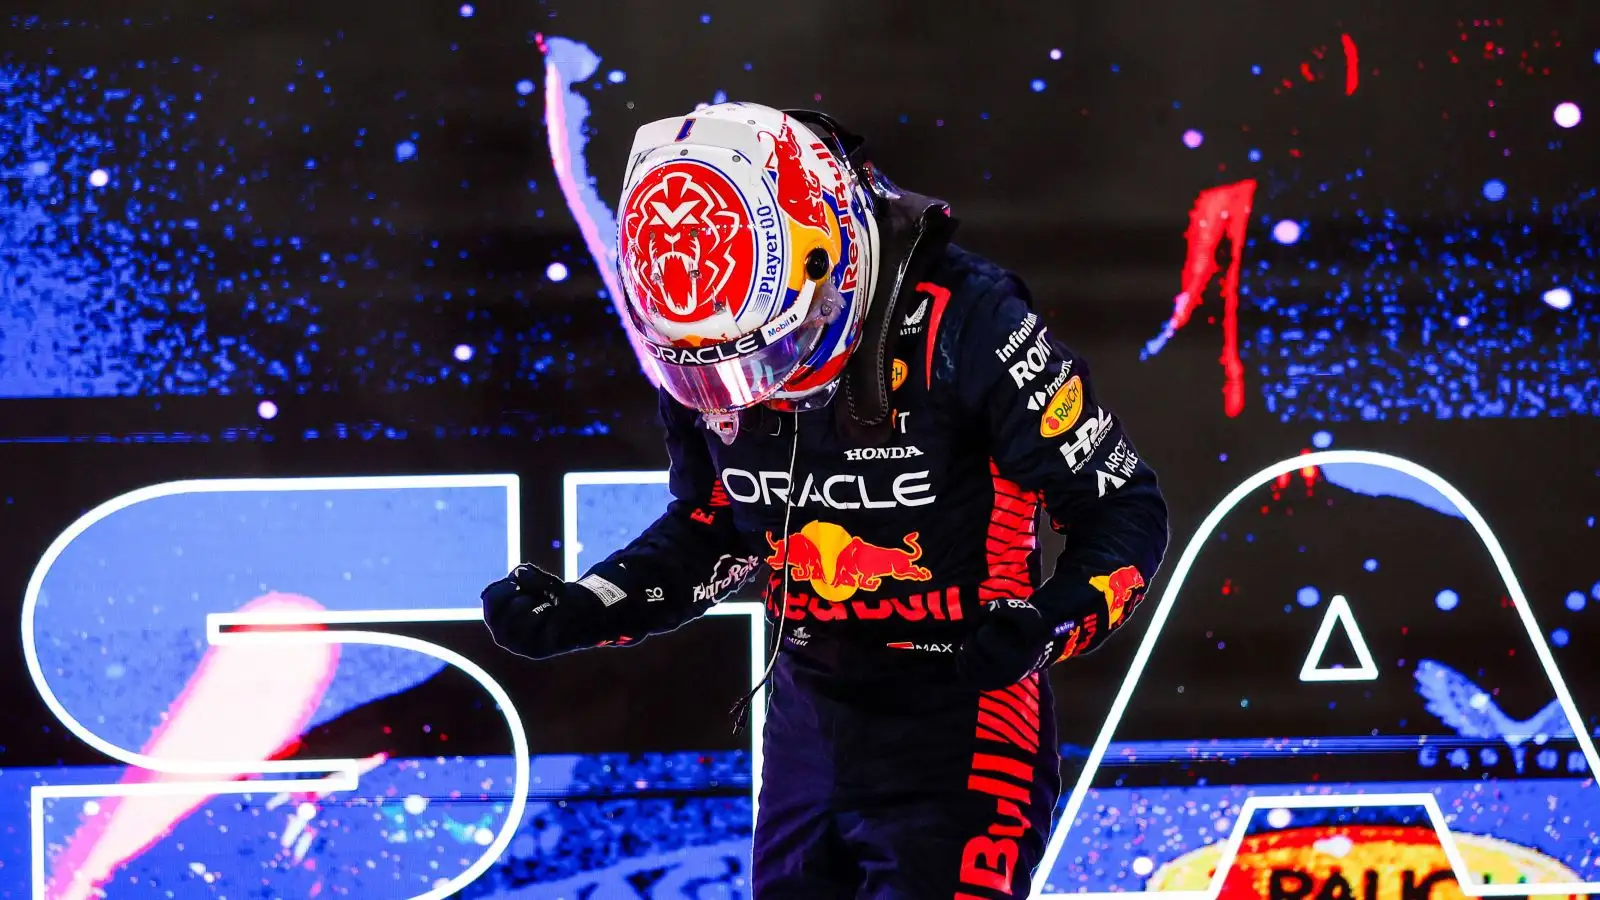 Red Bull driver Max Verstappen celebrates after clinching his third F1 title in the Qatar sprint race.